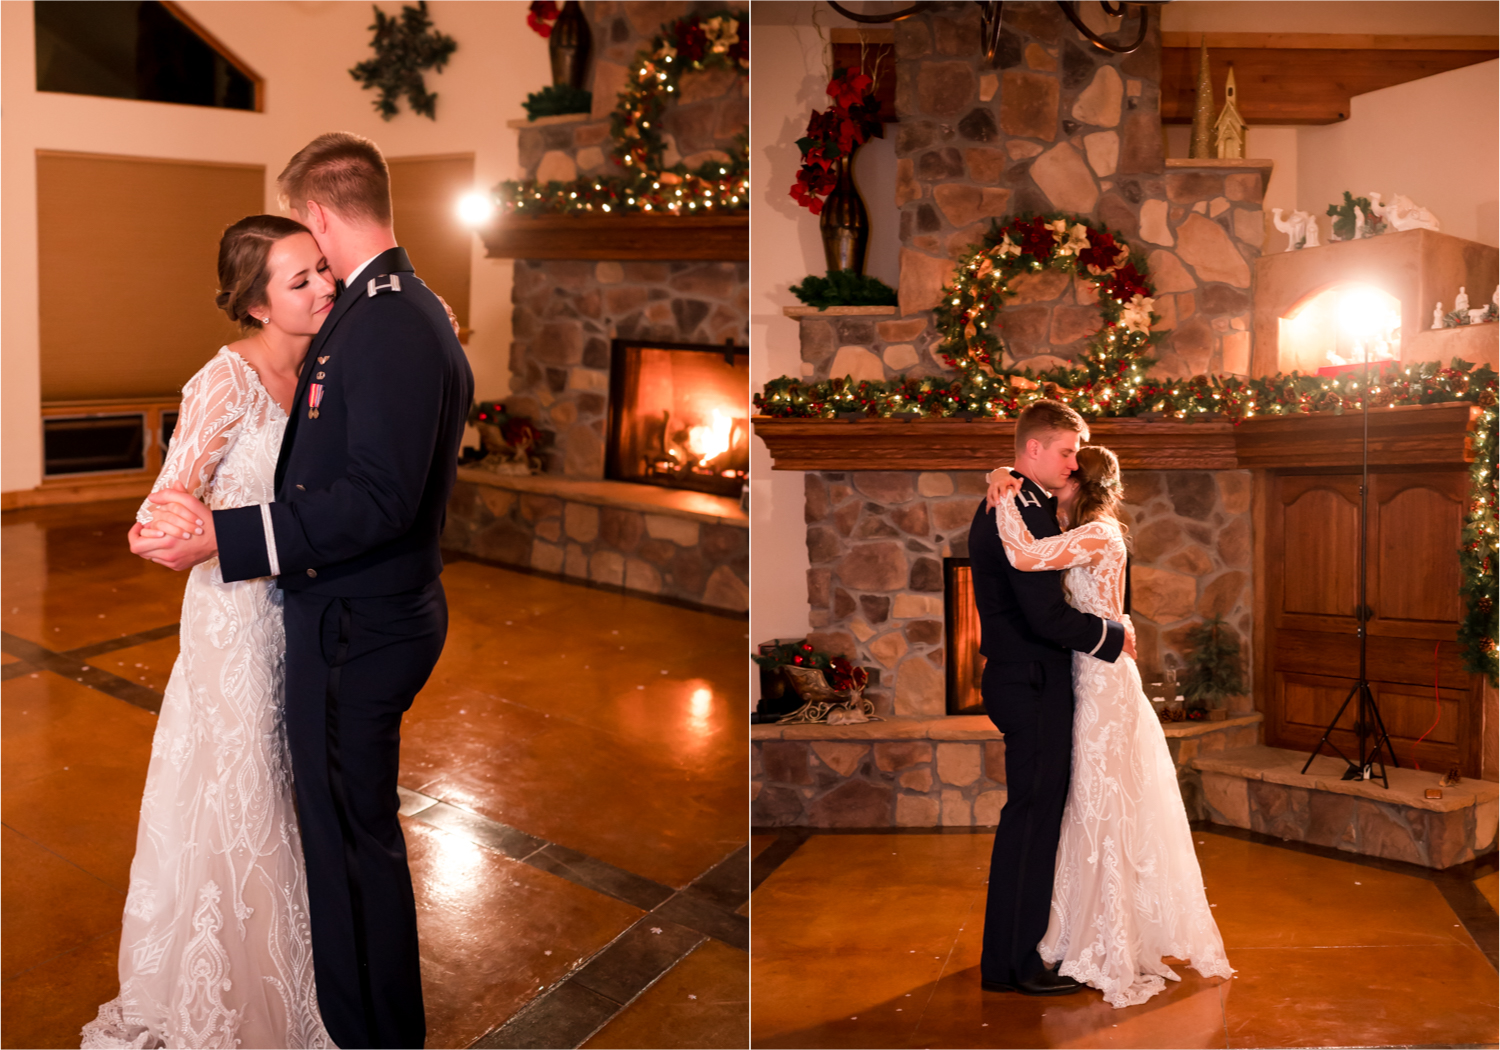 Winter Wonderland Wedding in Colorado Springs | Britni Girard Photography Colorado Wedding Photography and Film Team | Snow covered mountains and Christmas just a few days away | Annika + John's Nostalgic Winter Wedding | Bride's Dress iDream Bridal Essence of Australia | Air Force Academy | Rustic Winter Reception Bride and Groom Last Dance by Fireplace